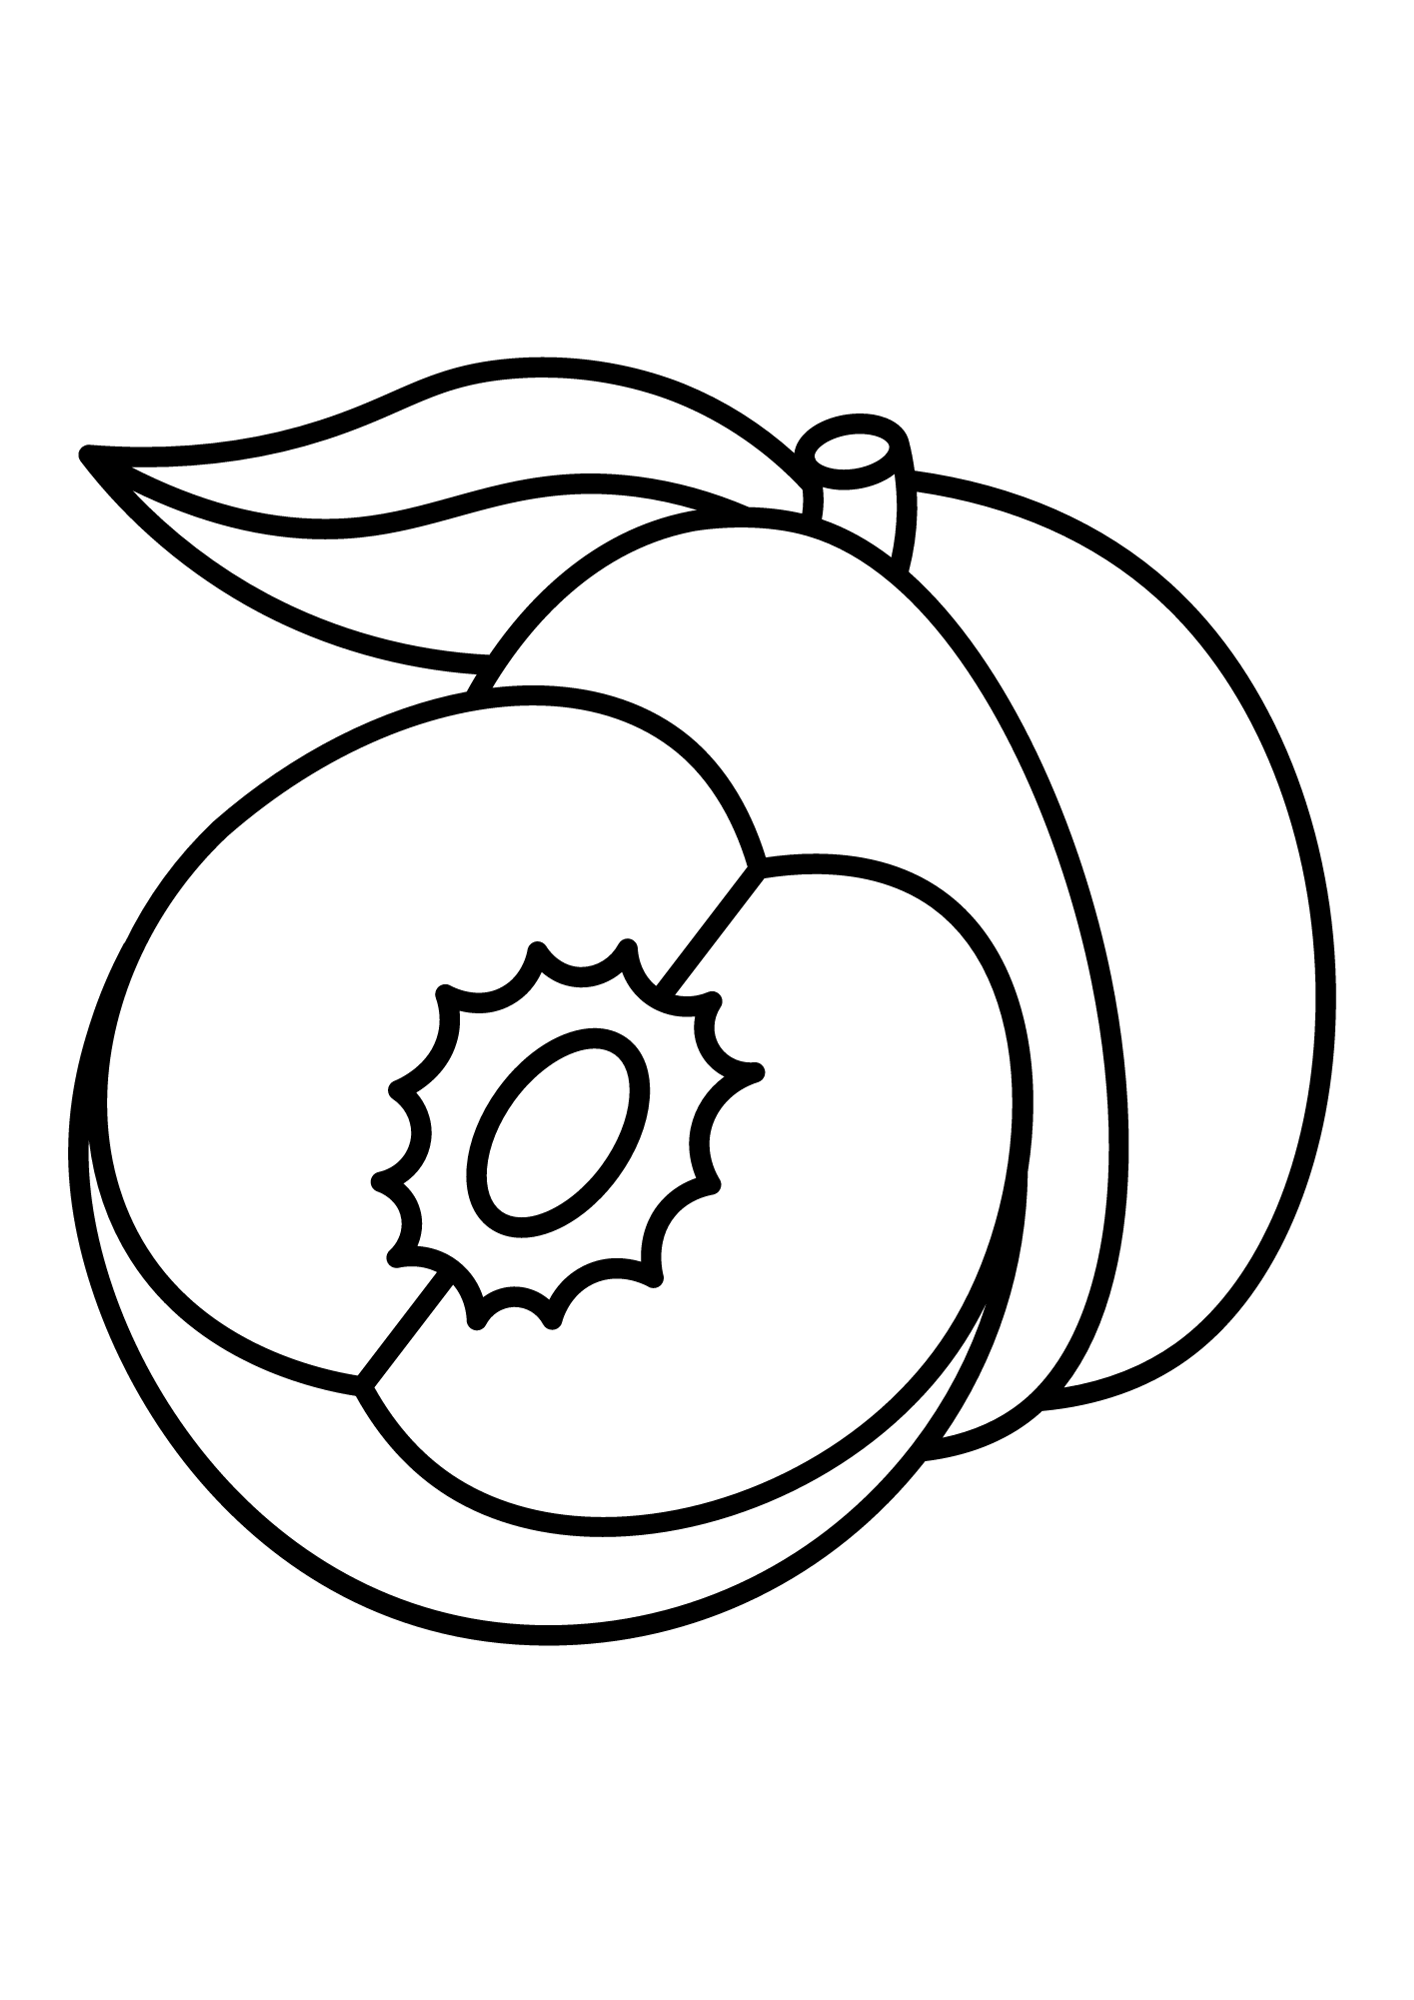 Apricot Picture Coloring Page